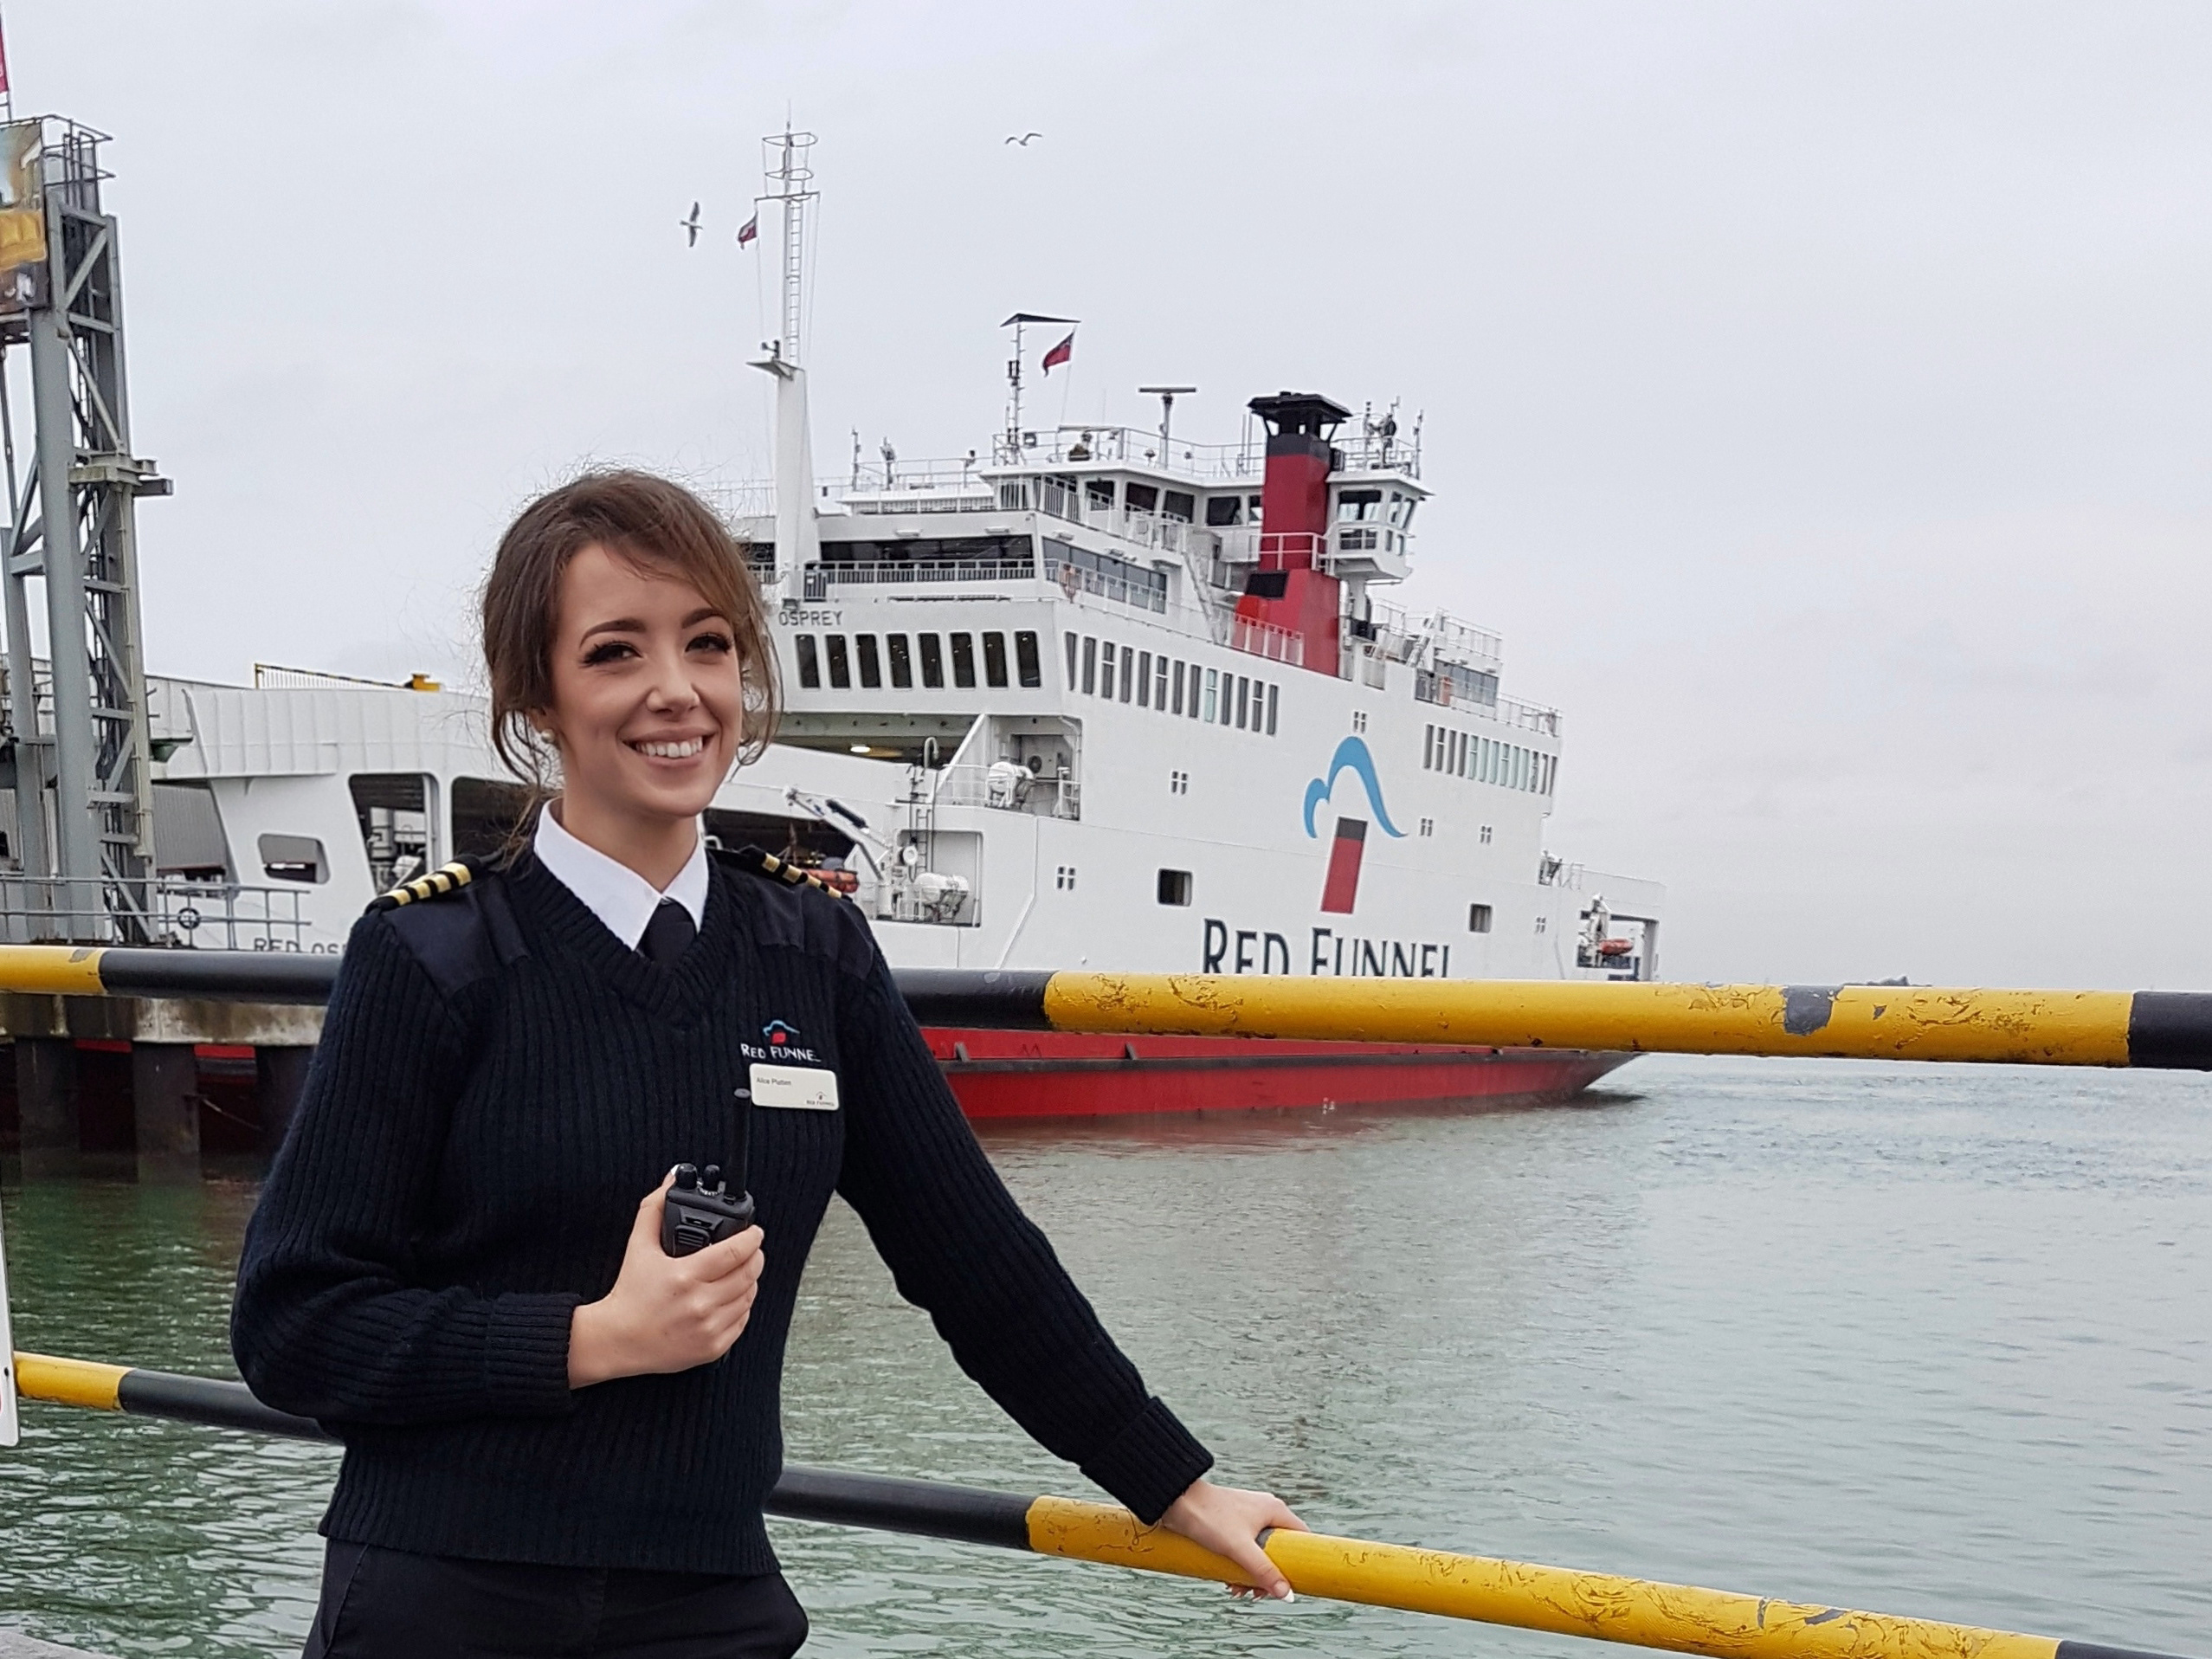 Red Funnel its first captain